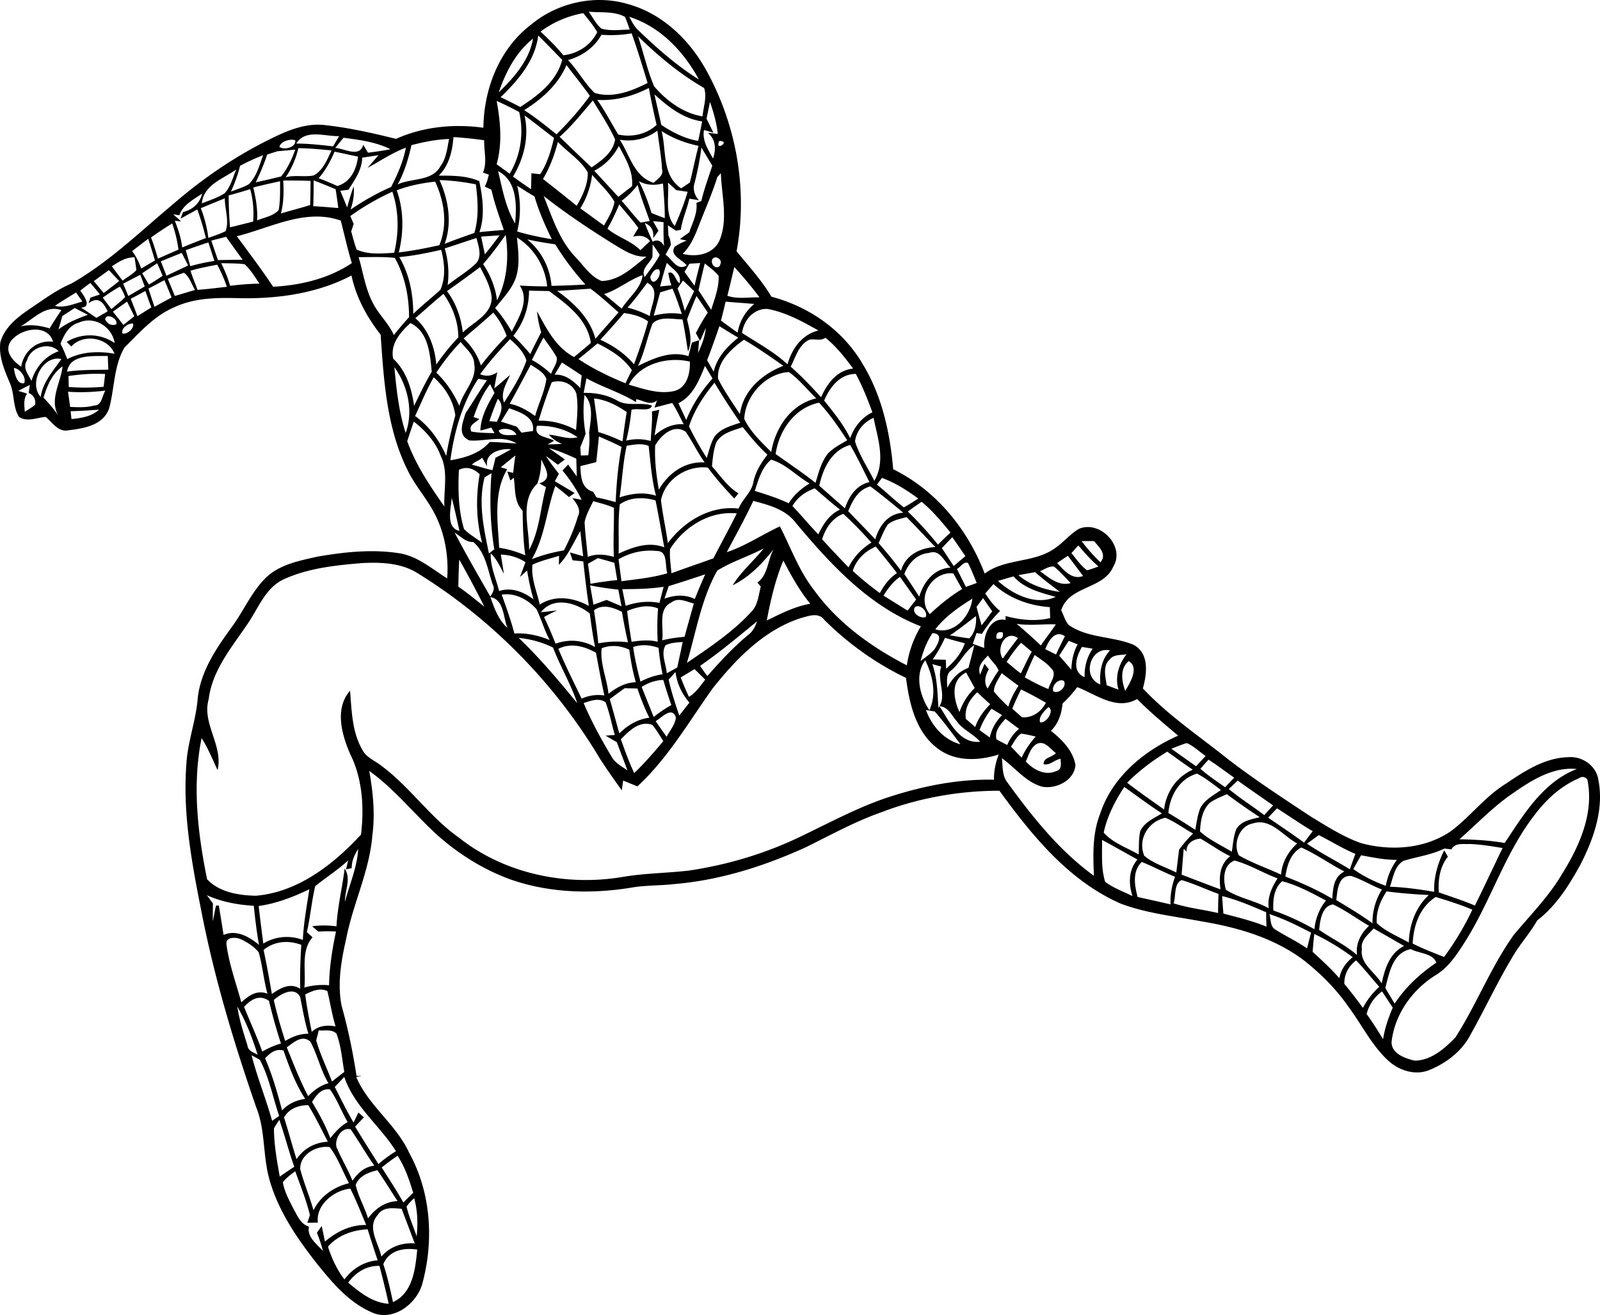 Spiderman coloring page download for free print